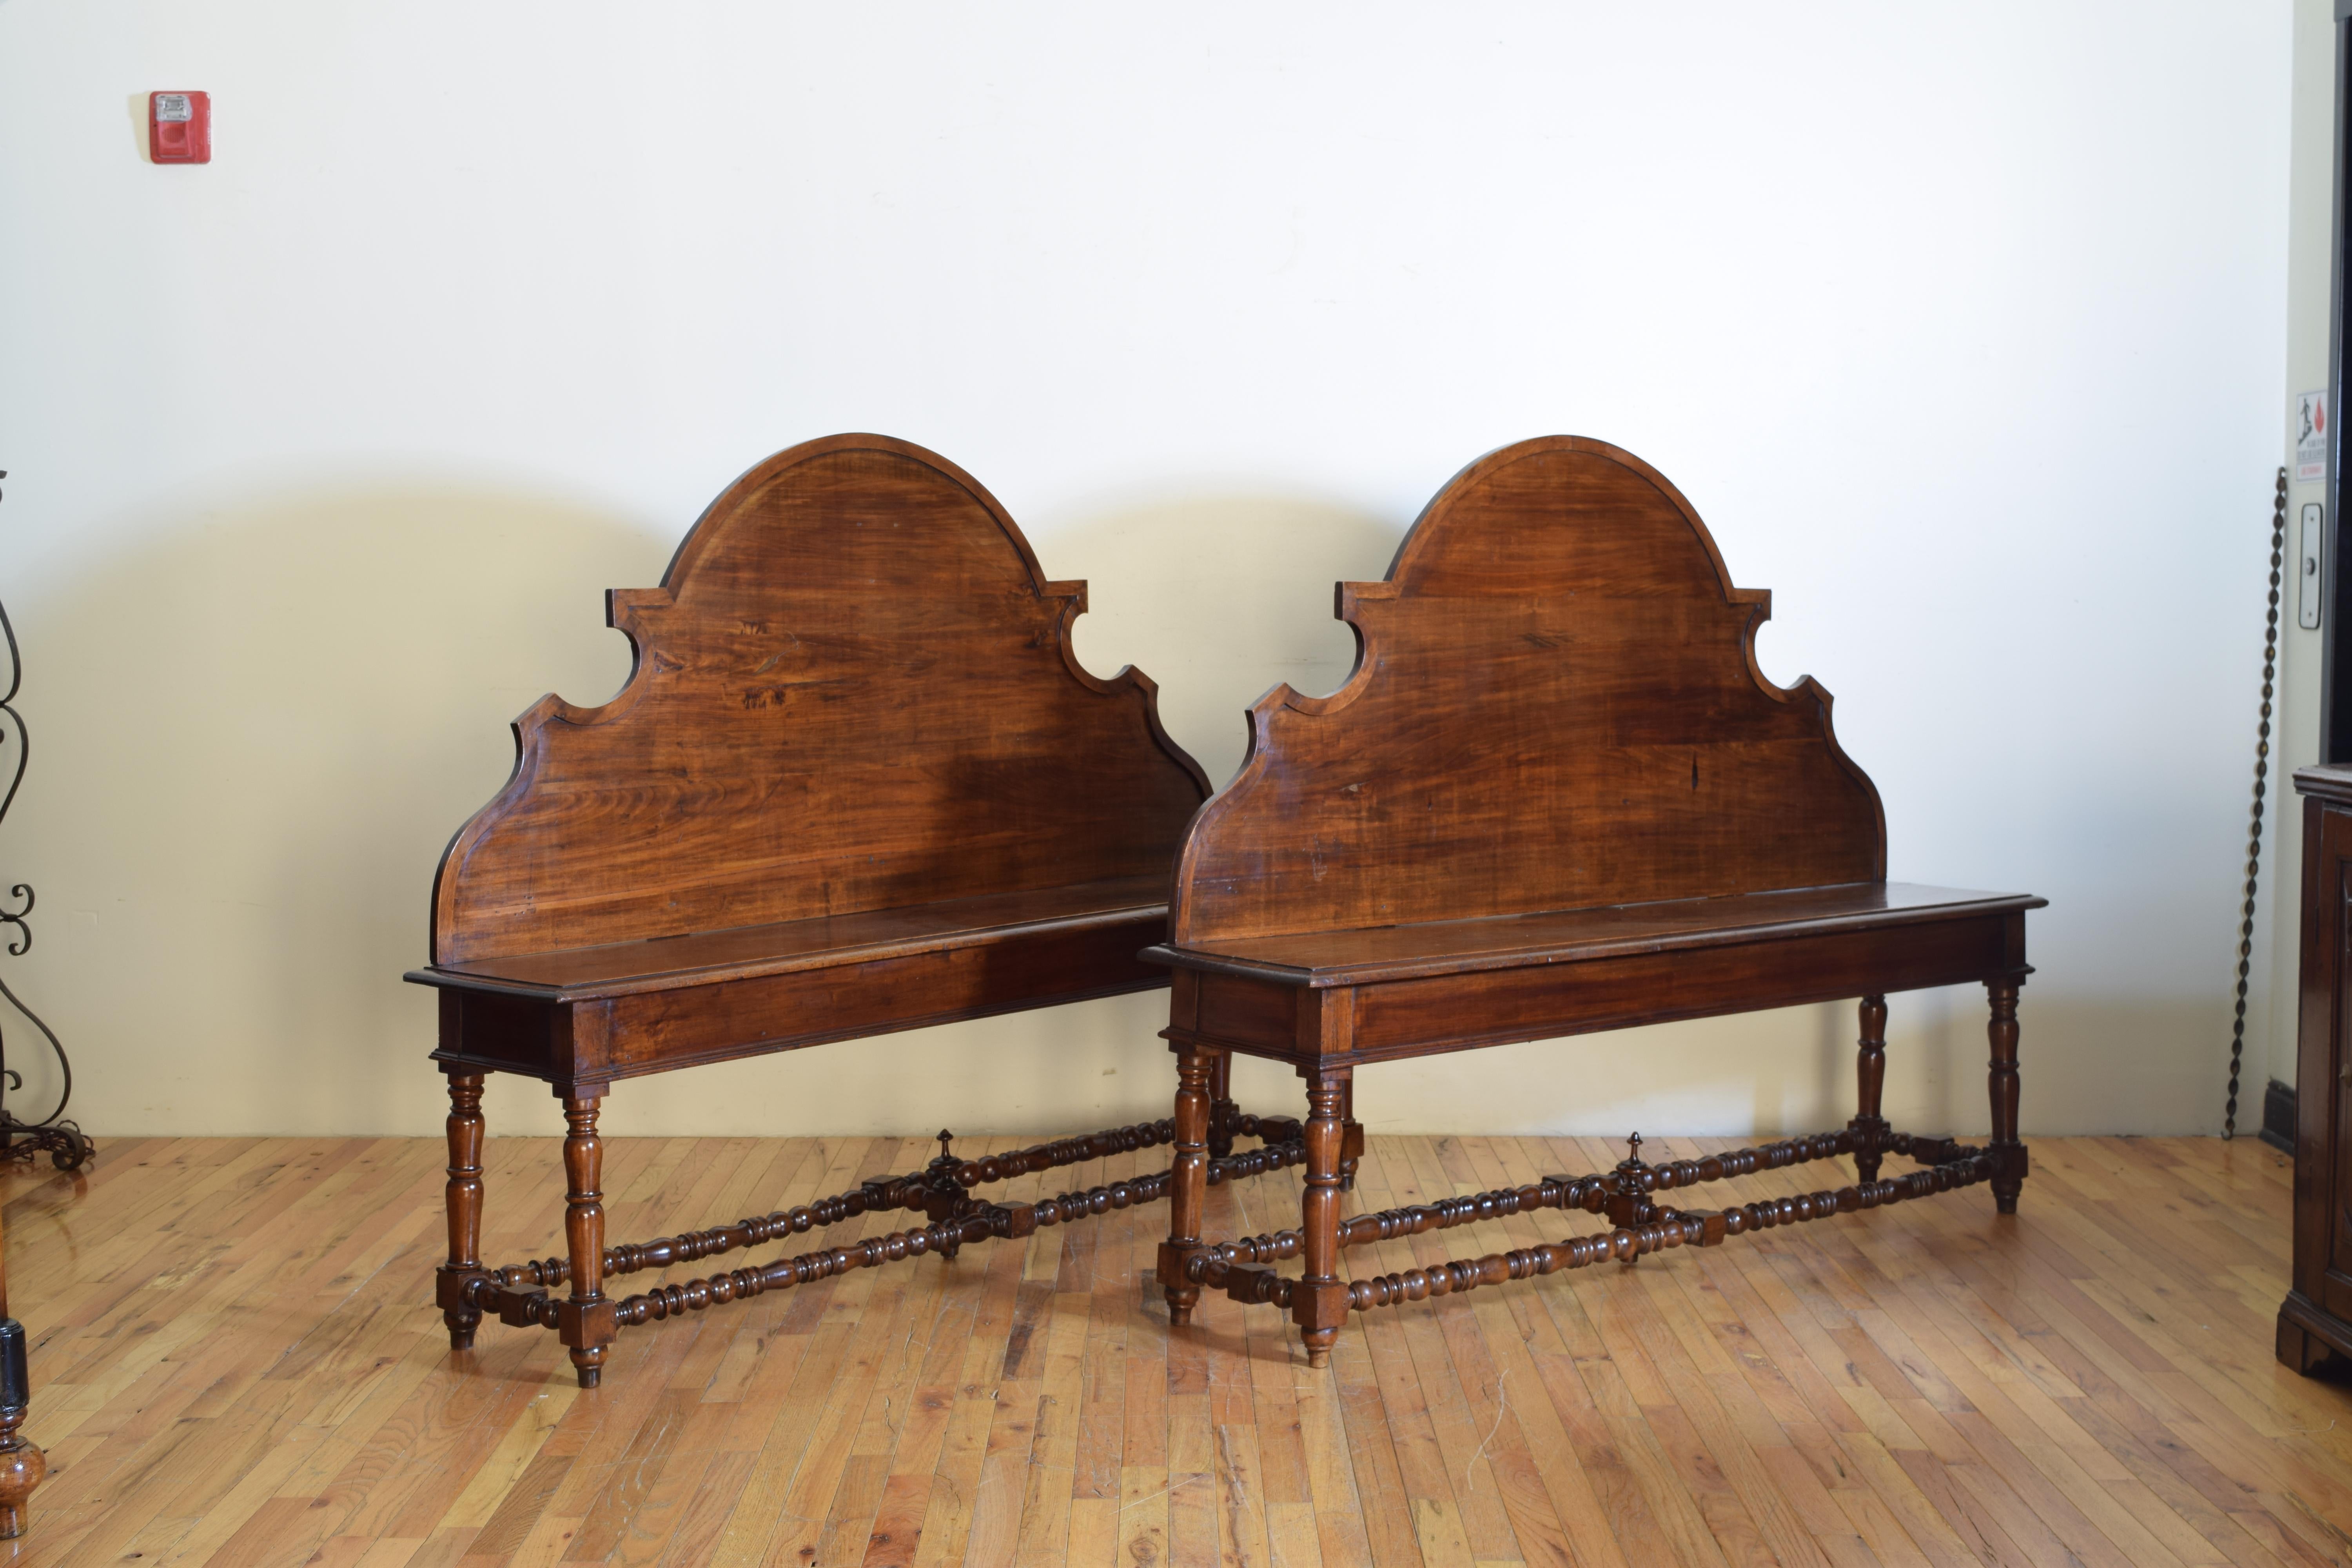 This well sized, as in manageable, pair of benches has Baroque shaped tall backrests above rectangular seats with molded edges, the underside of one of the seats with a secret storage area, raised on turned legs joined by turned box stretchers, the